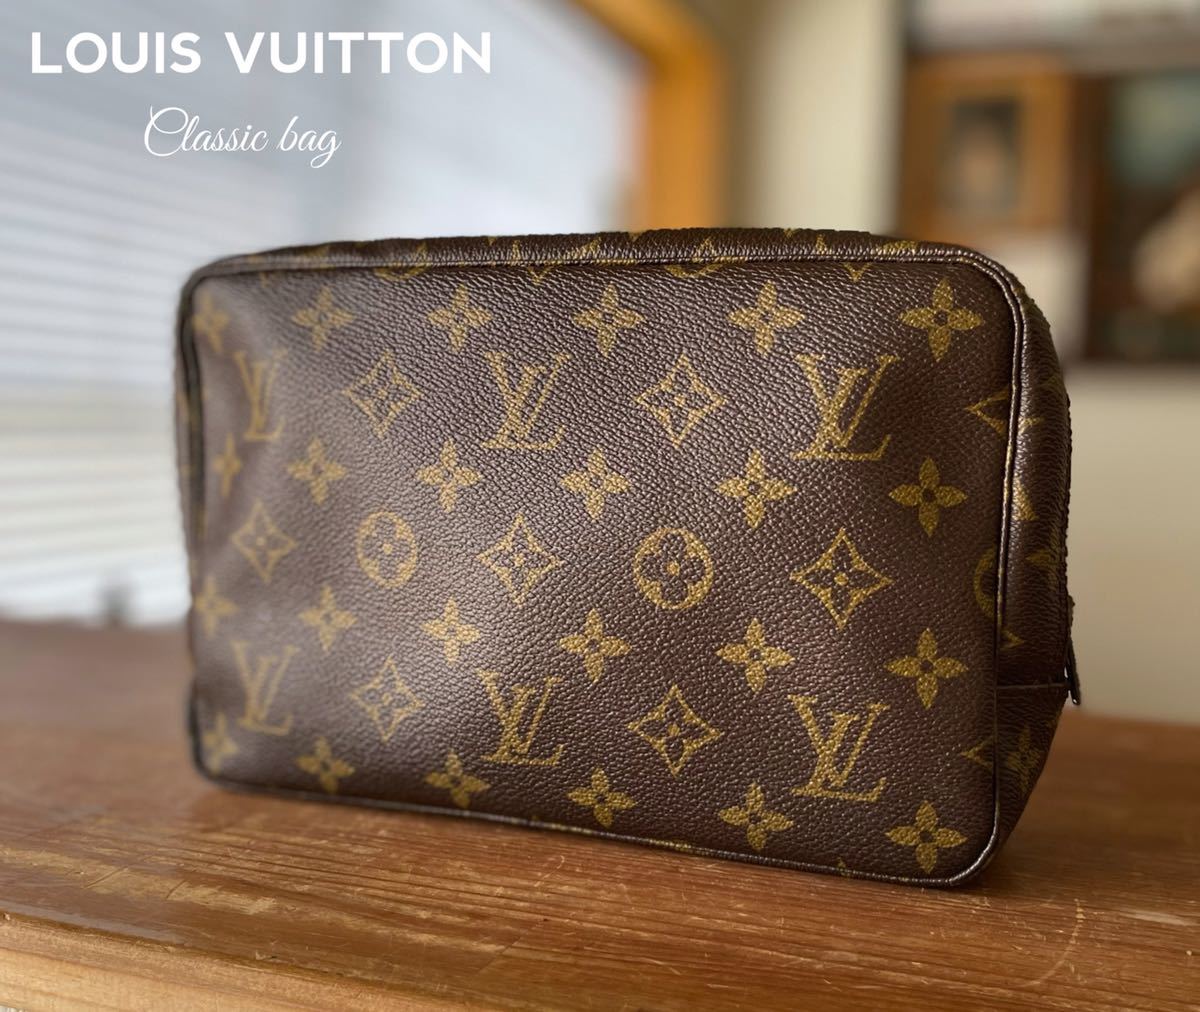 KBN67】希少!! 正規品 LOUIS VUITTON ルイヴィトン トゥルーストワレ ポーチ